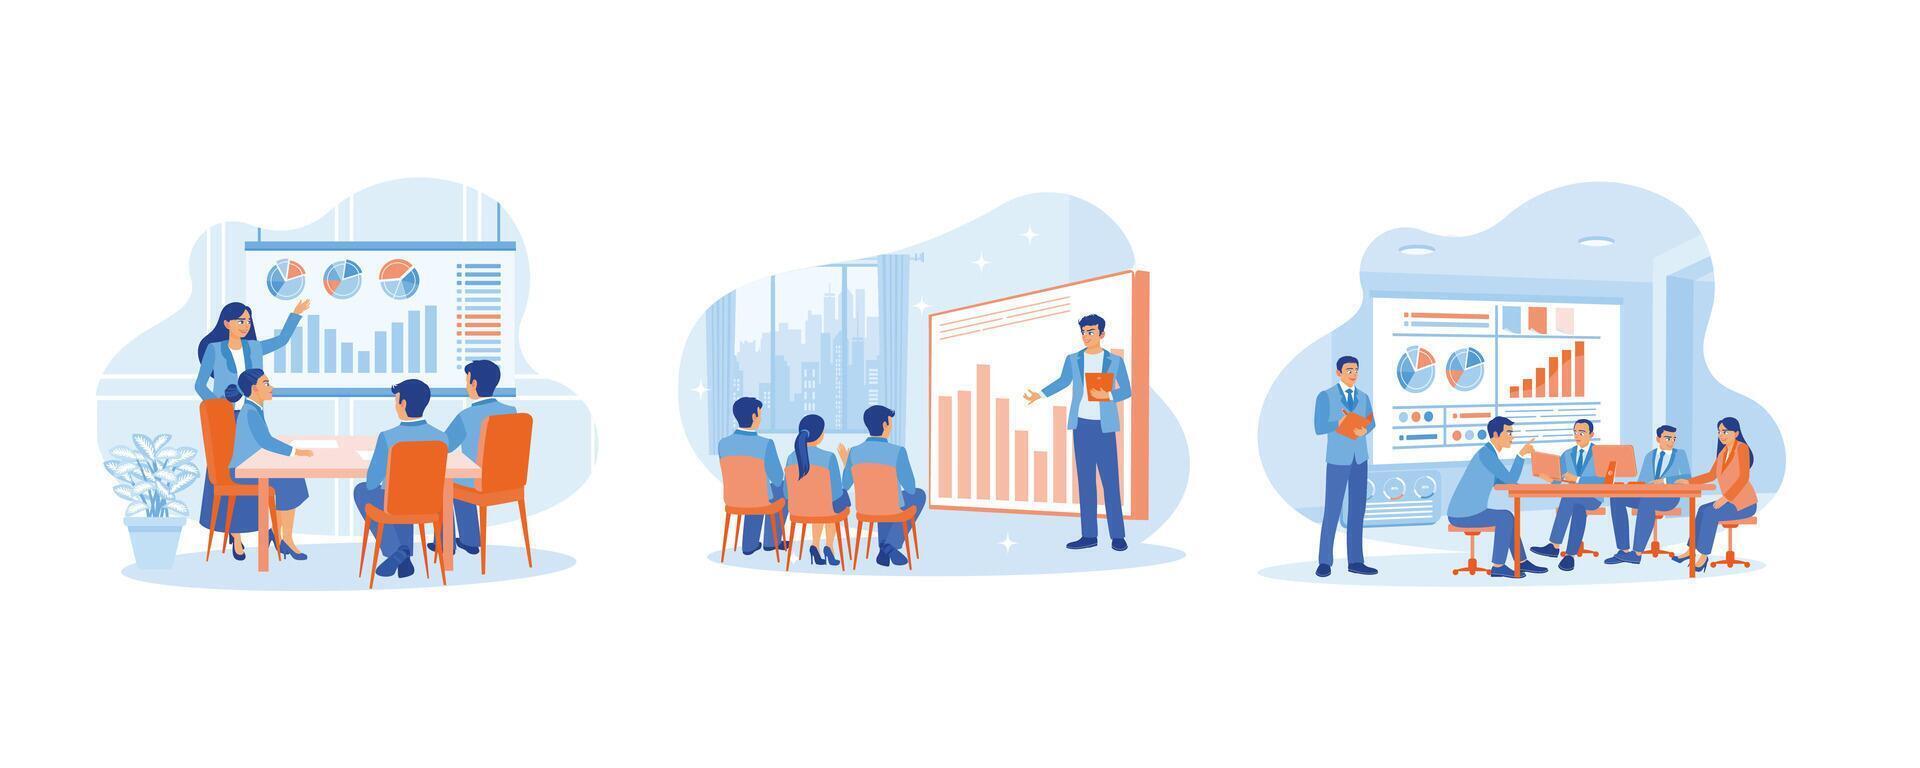 The manager leads meetings with the business team. Display the business growth graph. Exchange ideas during meetings. Business Meeting concept. Set flat vector illustration.